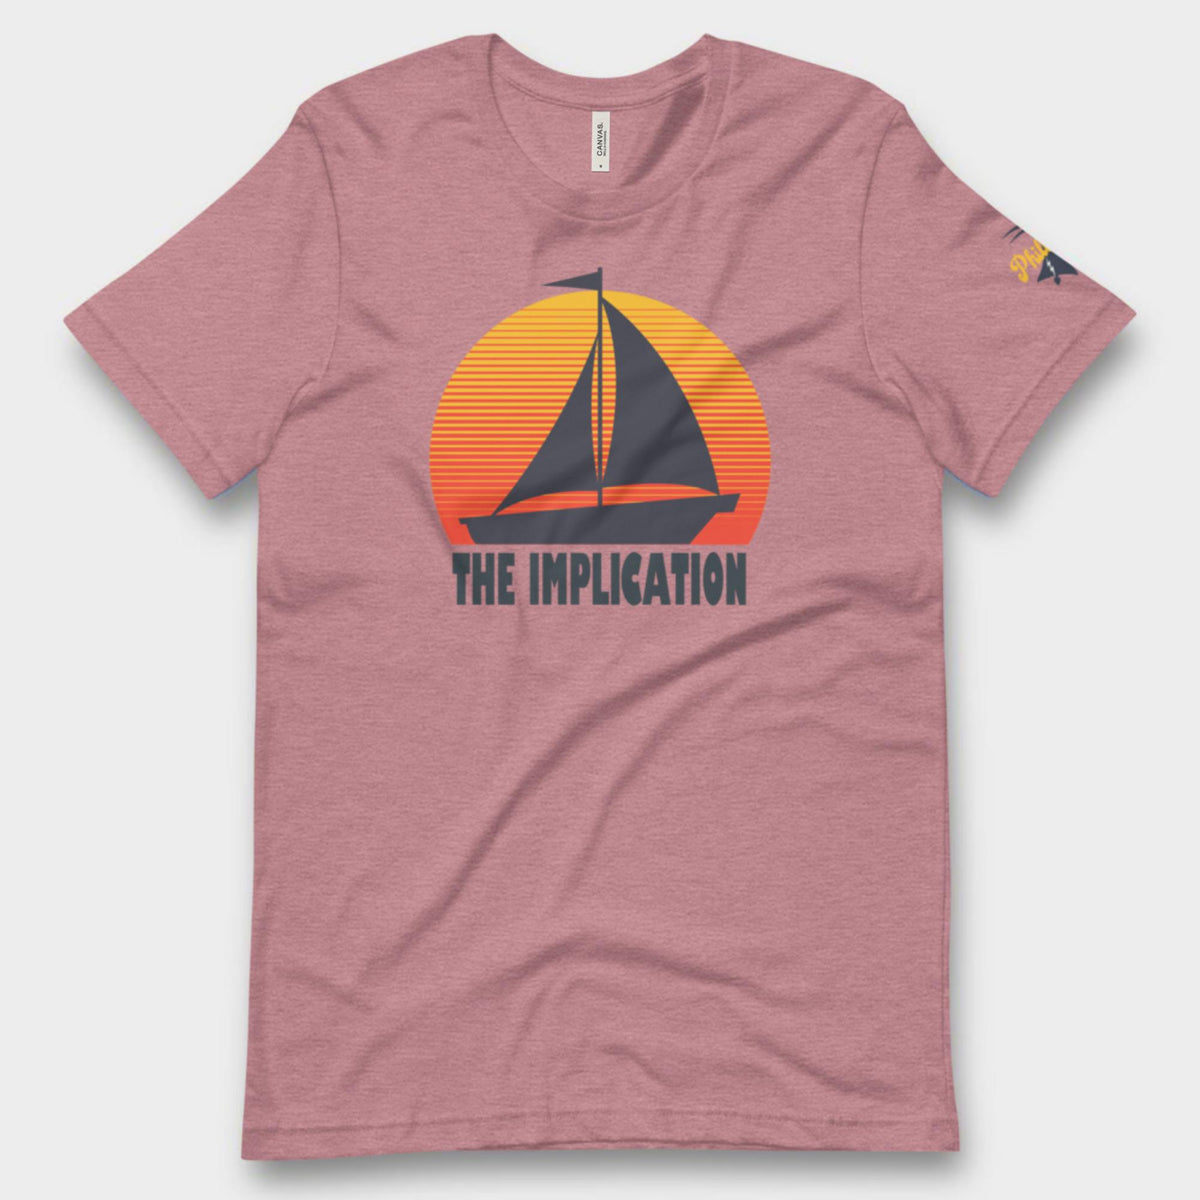 &quot;The Implication&quot; Tee